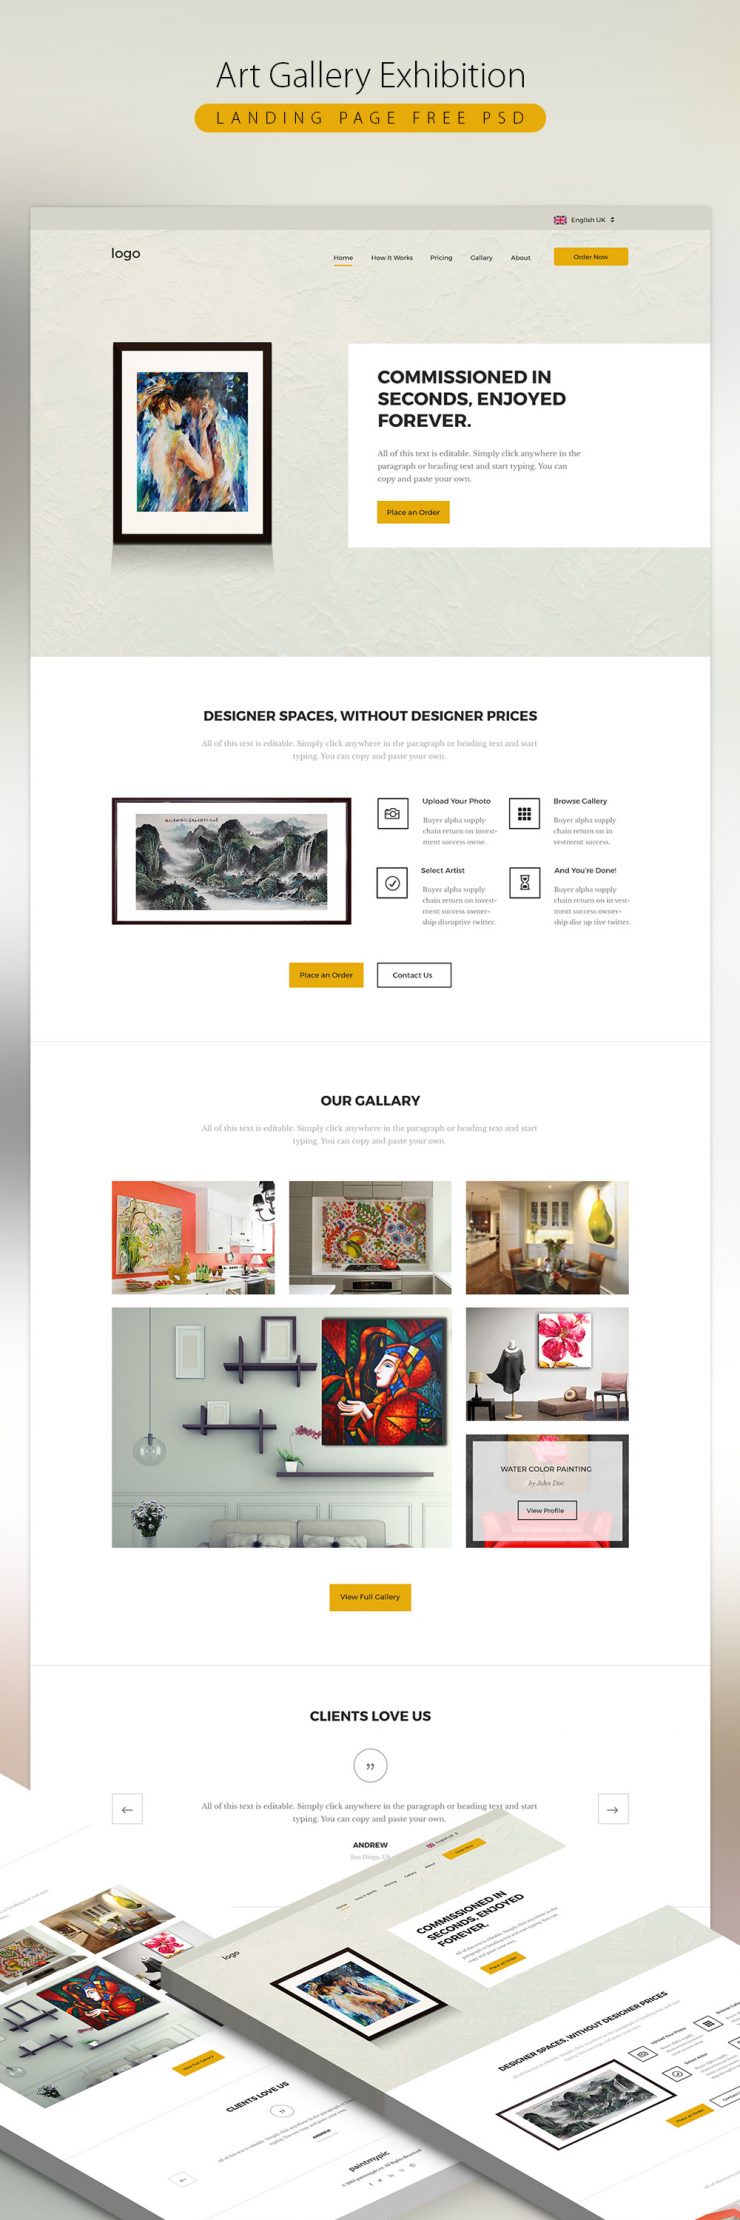 Download Art Gallery Exhibition Landing page Free PSD Download - Download PSD